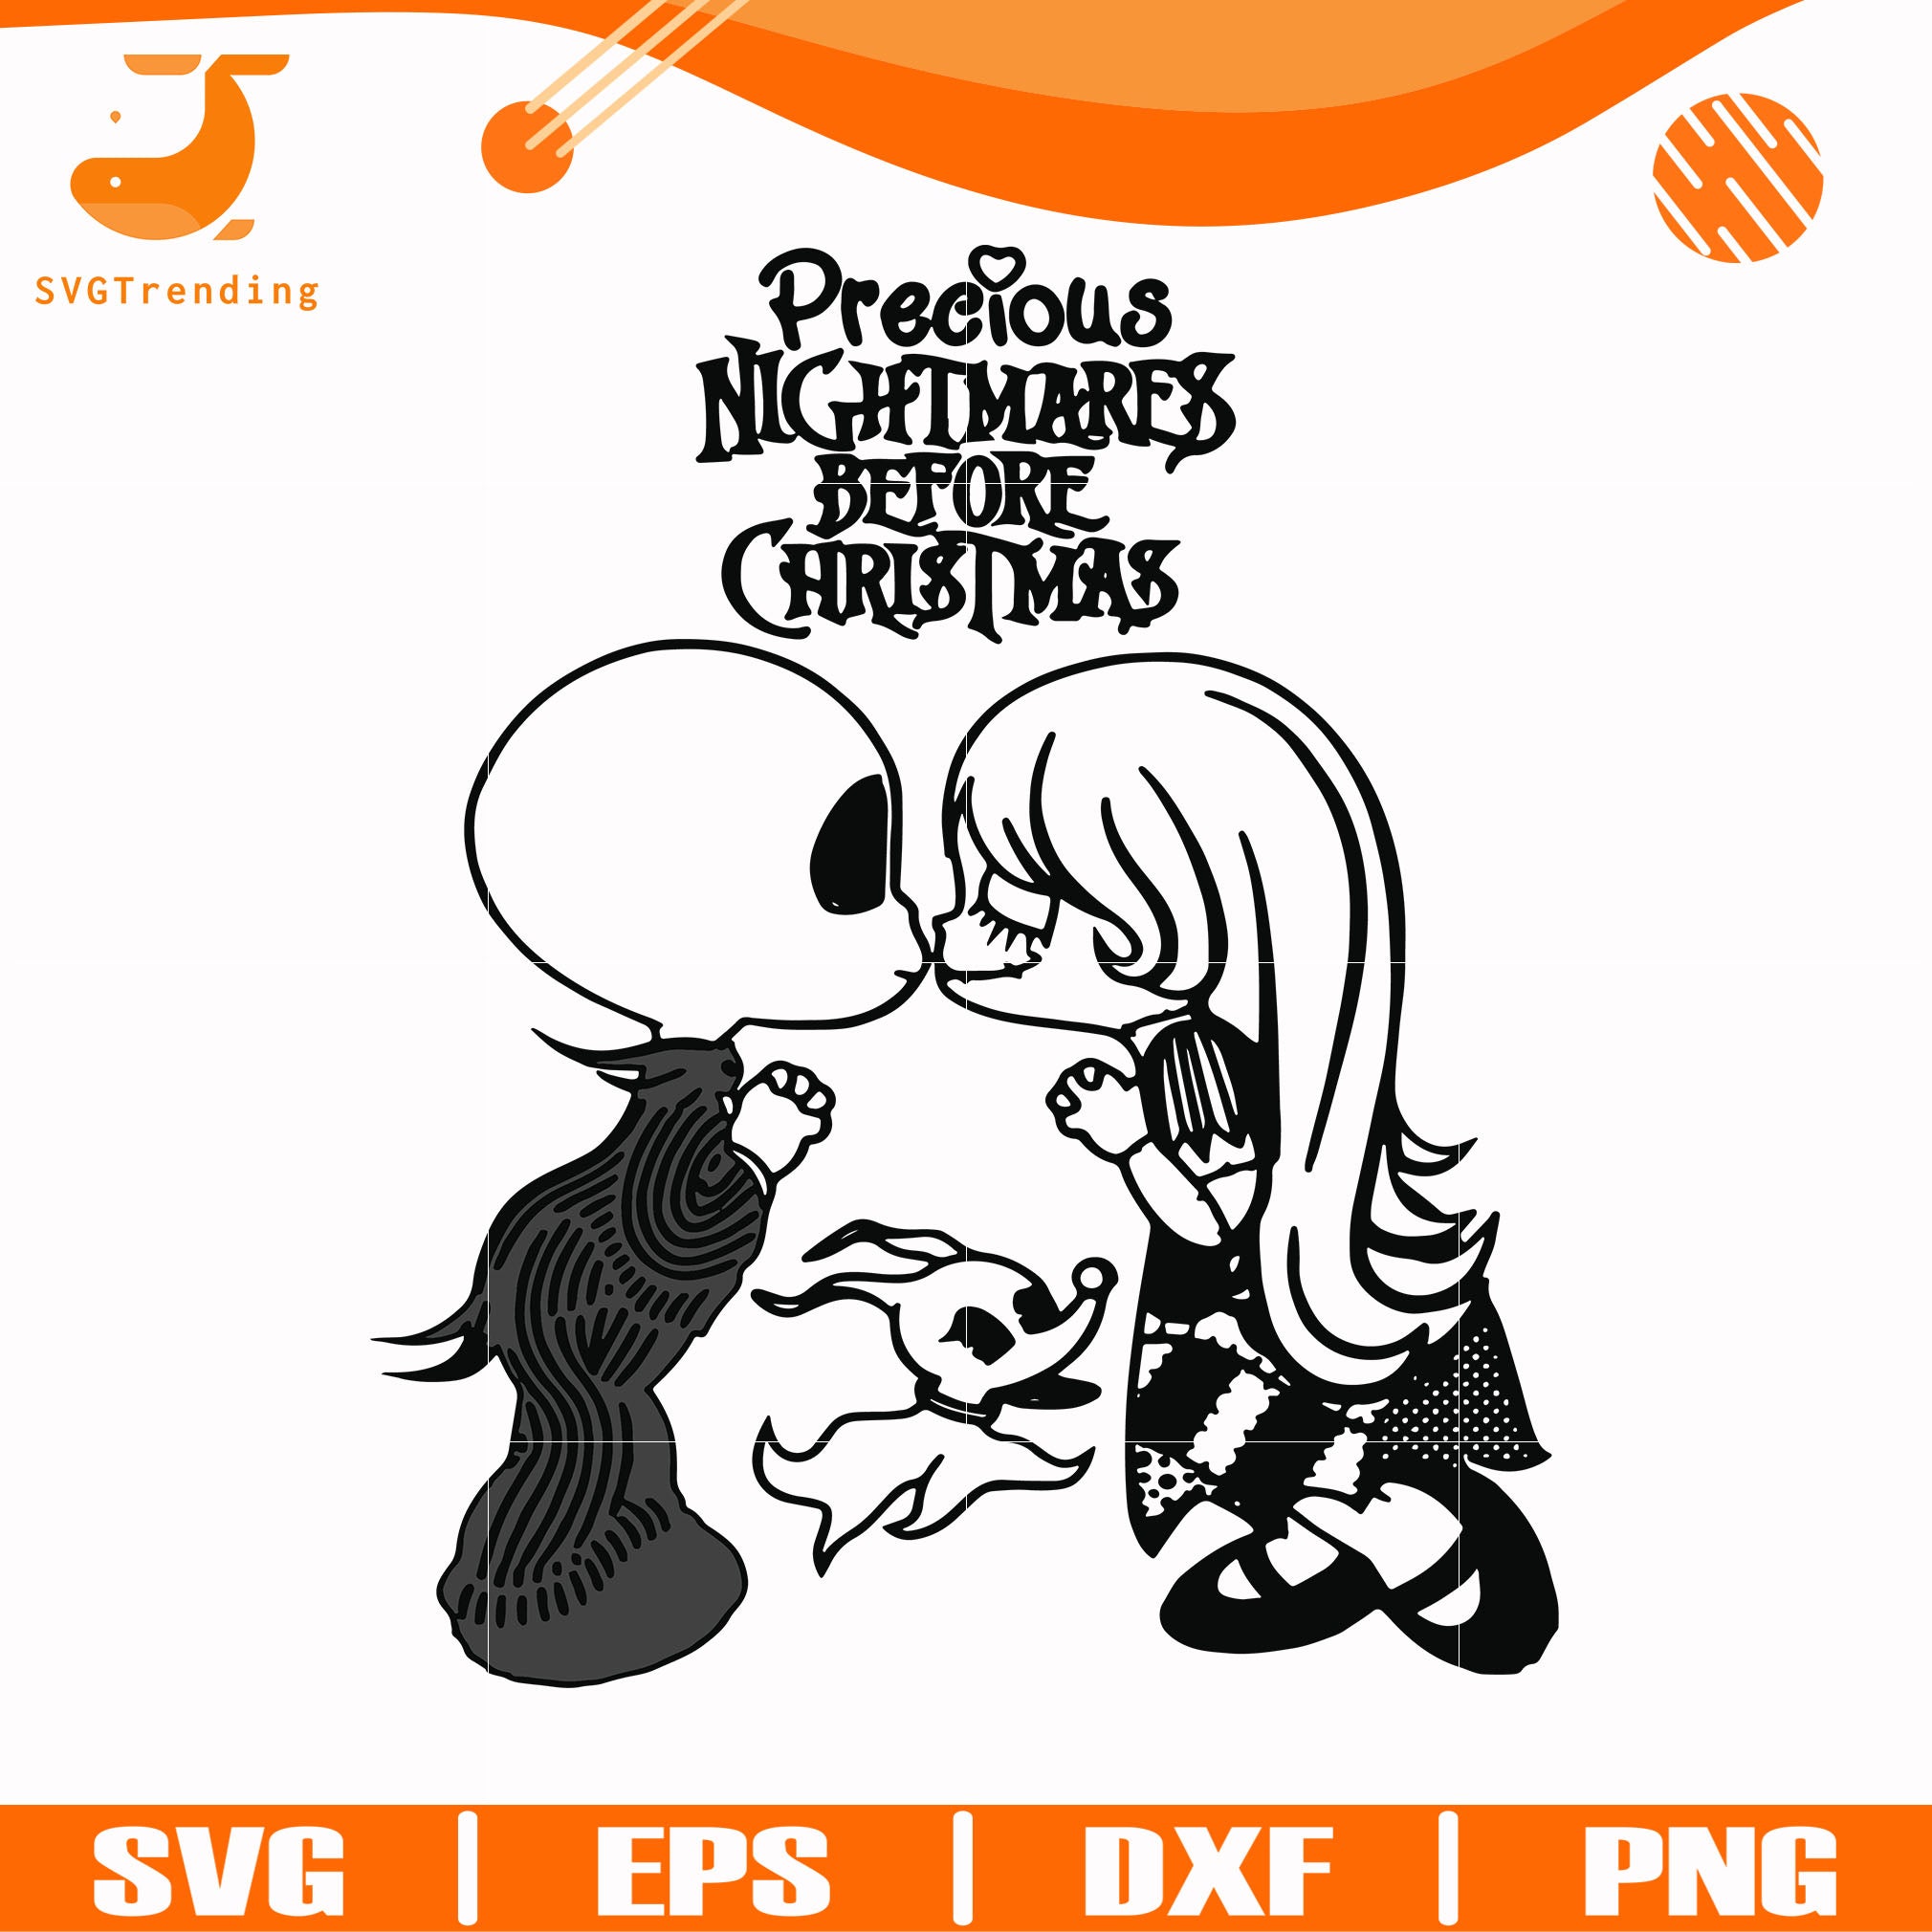 Download Precious Nightmare Before Christmas Svg Png Dxf Eps Digital File Nc Svgtrending